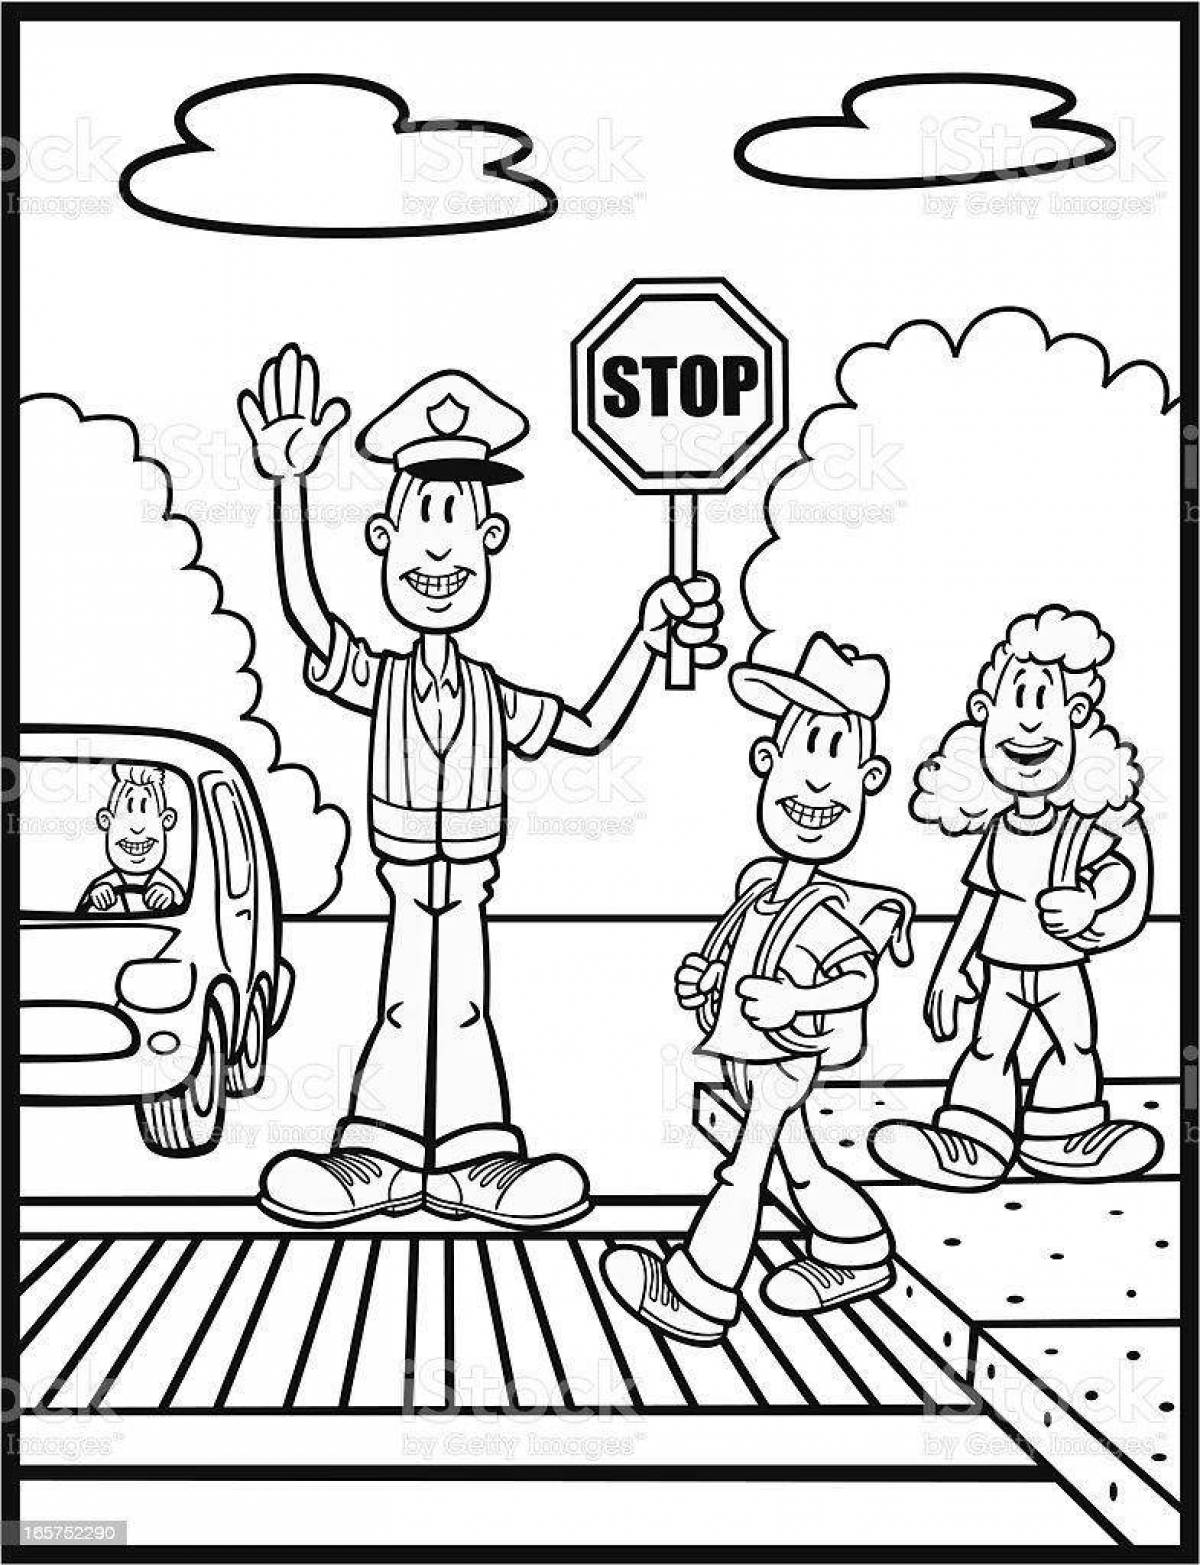 Coloring page cheerful pedestrian